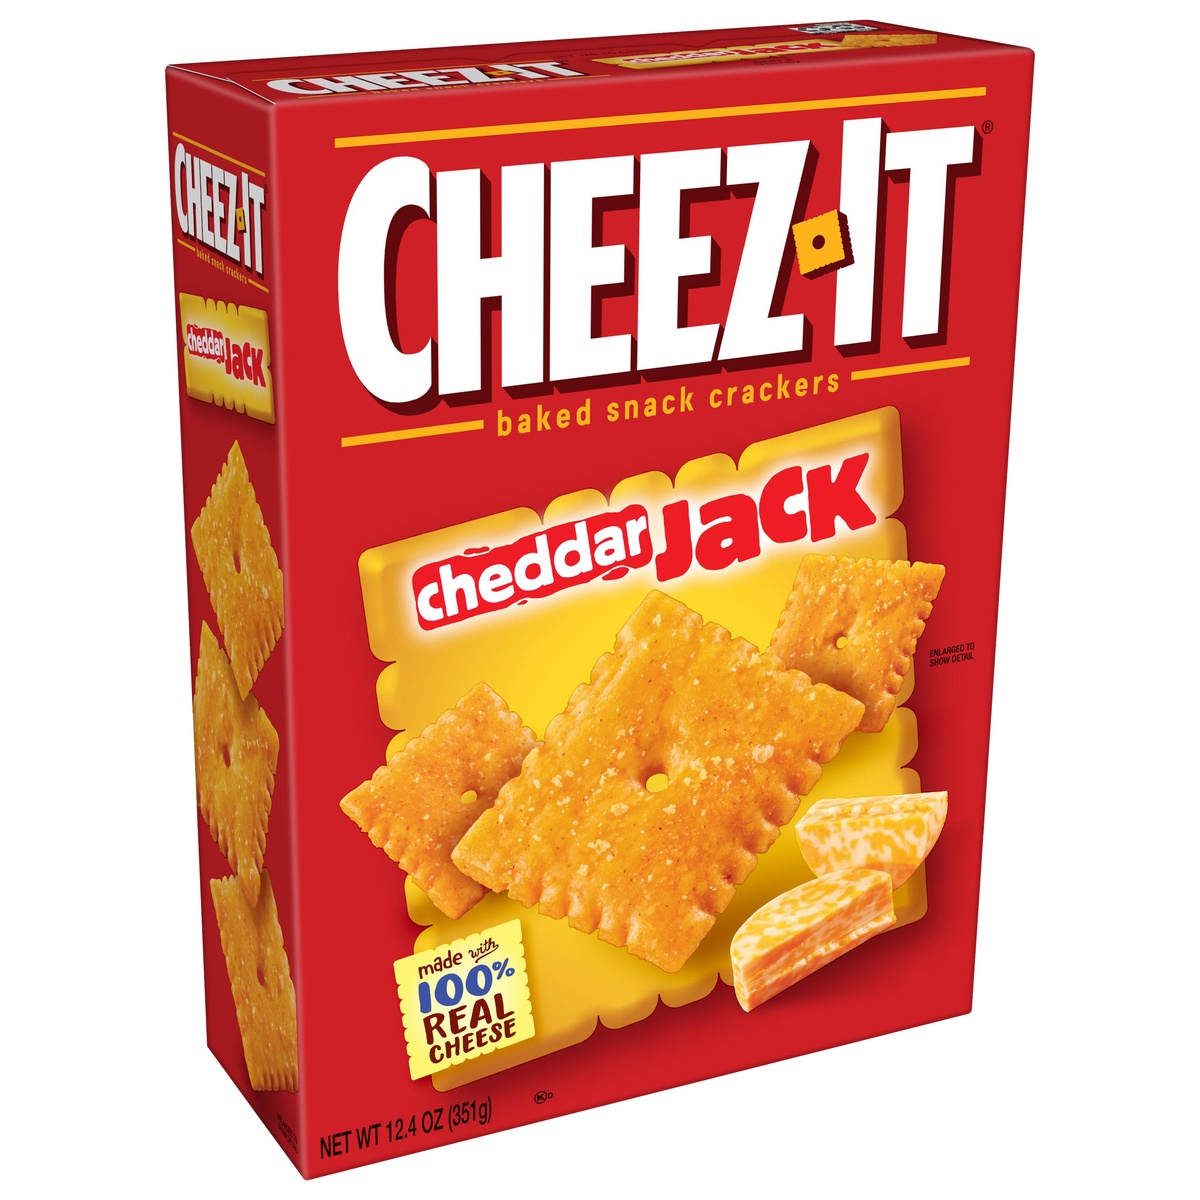 slide 2 of 10, Cheez-It Cheese Crackers, Baked Snack Crackers, Cheddar Jack, 12.4 oz